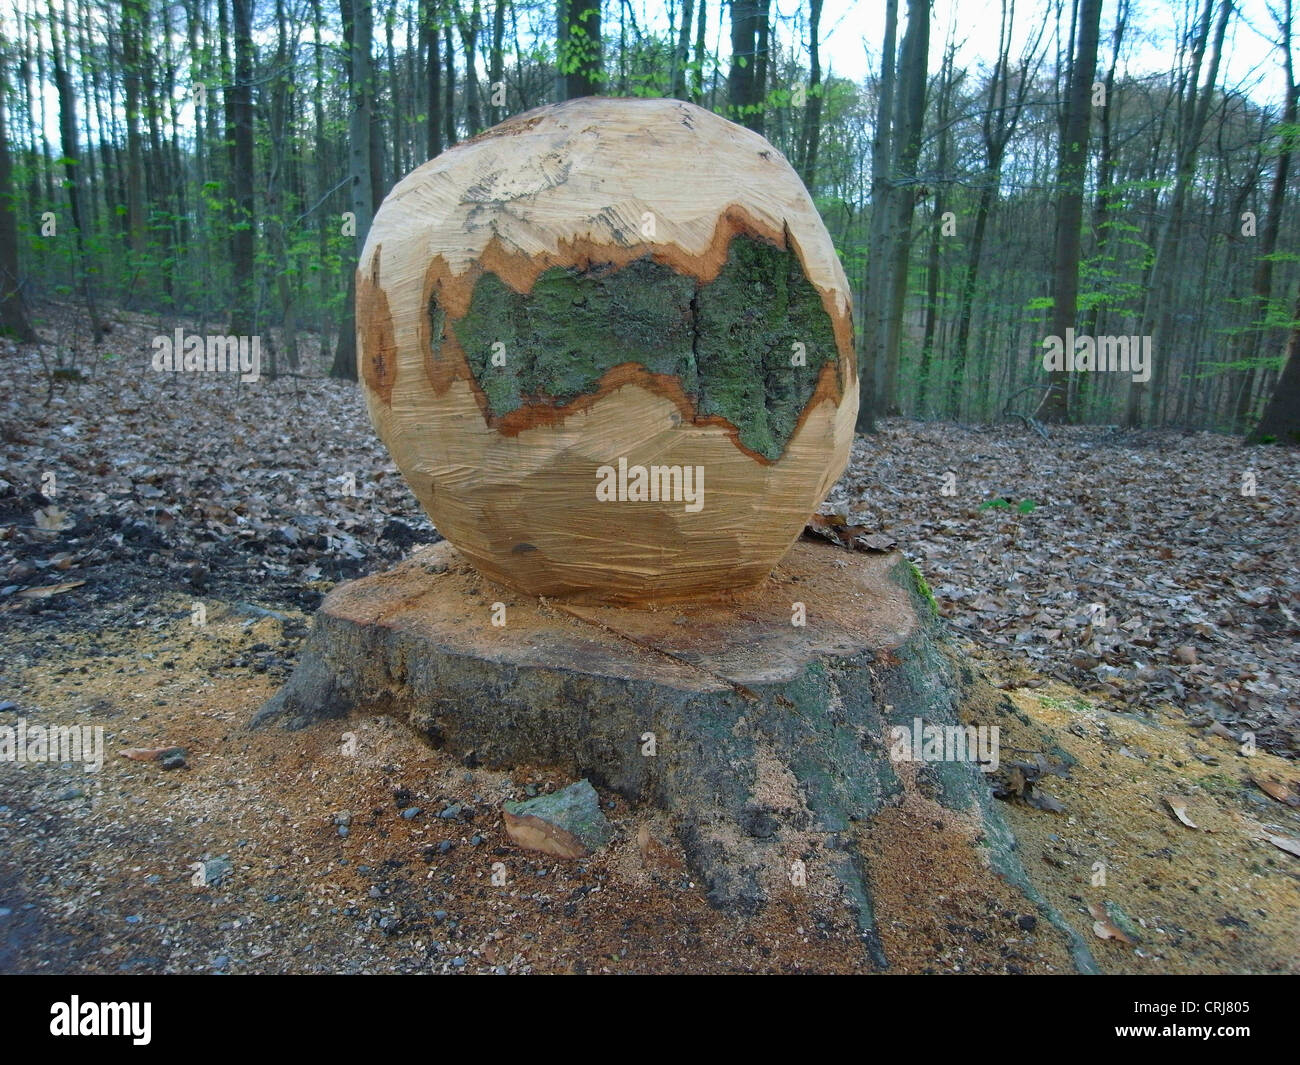 big ball carved from a tree stub still rooted in the forest ground Stock Photo